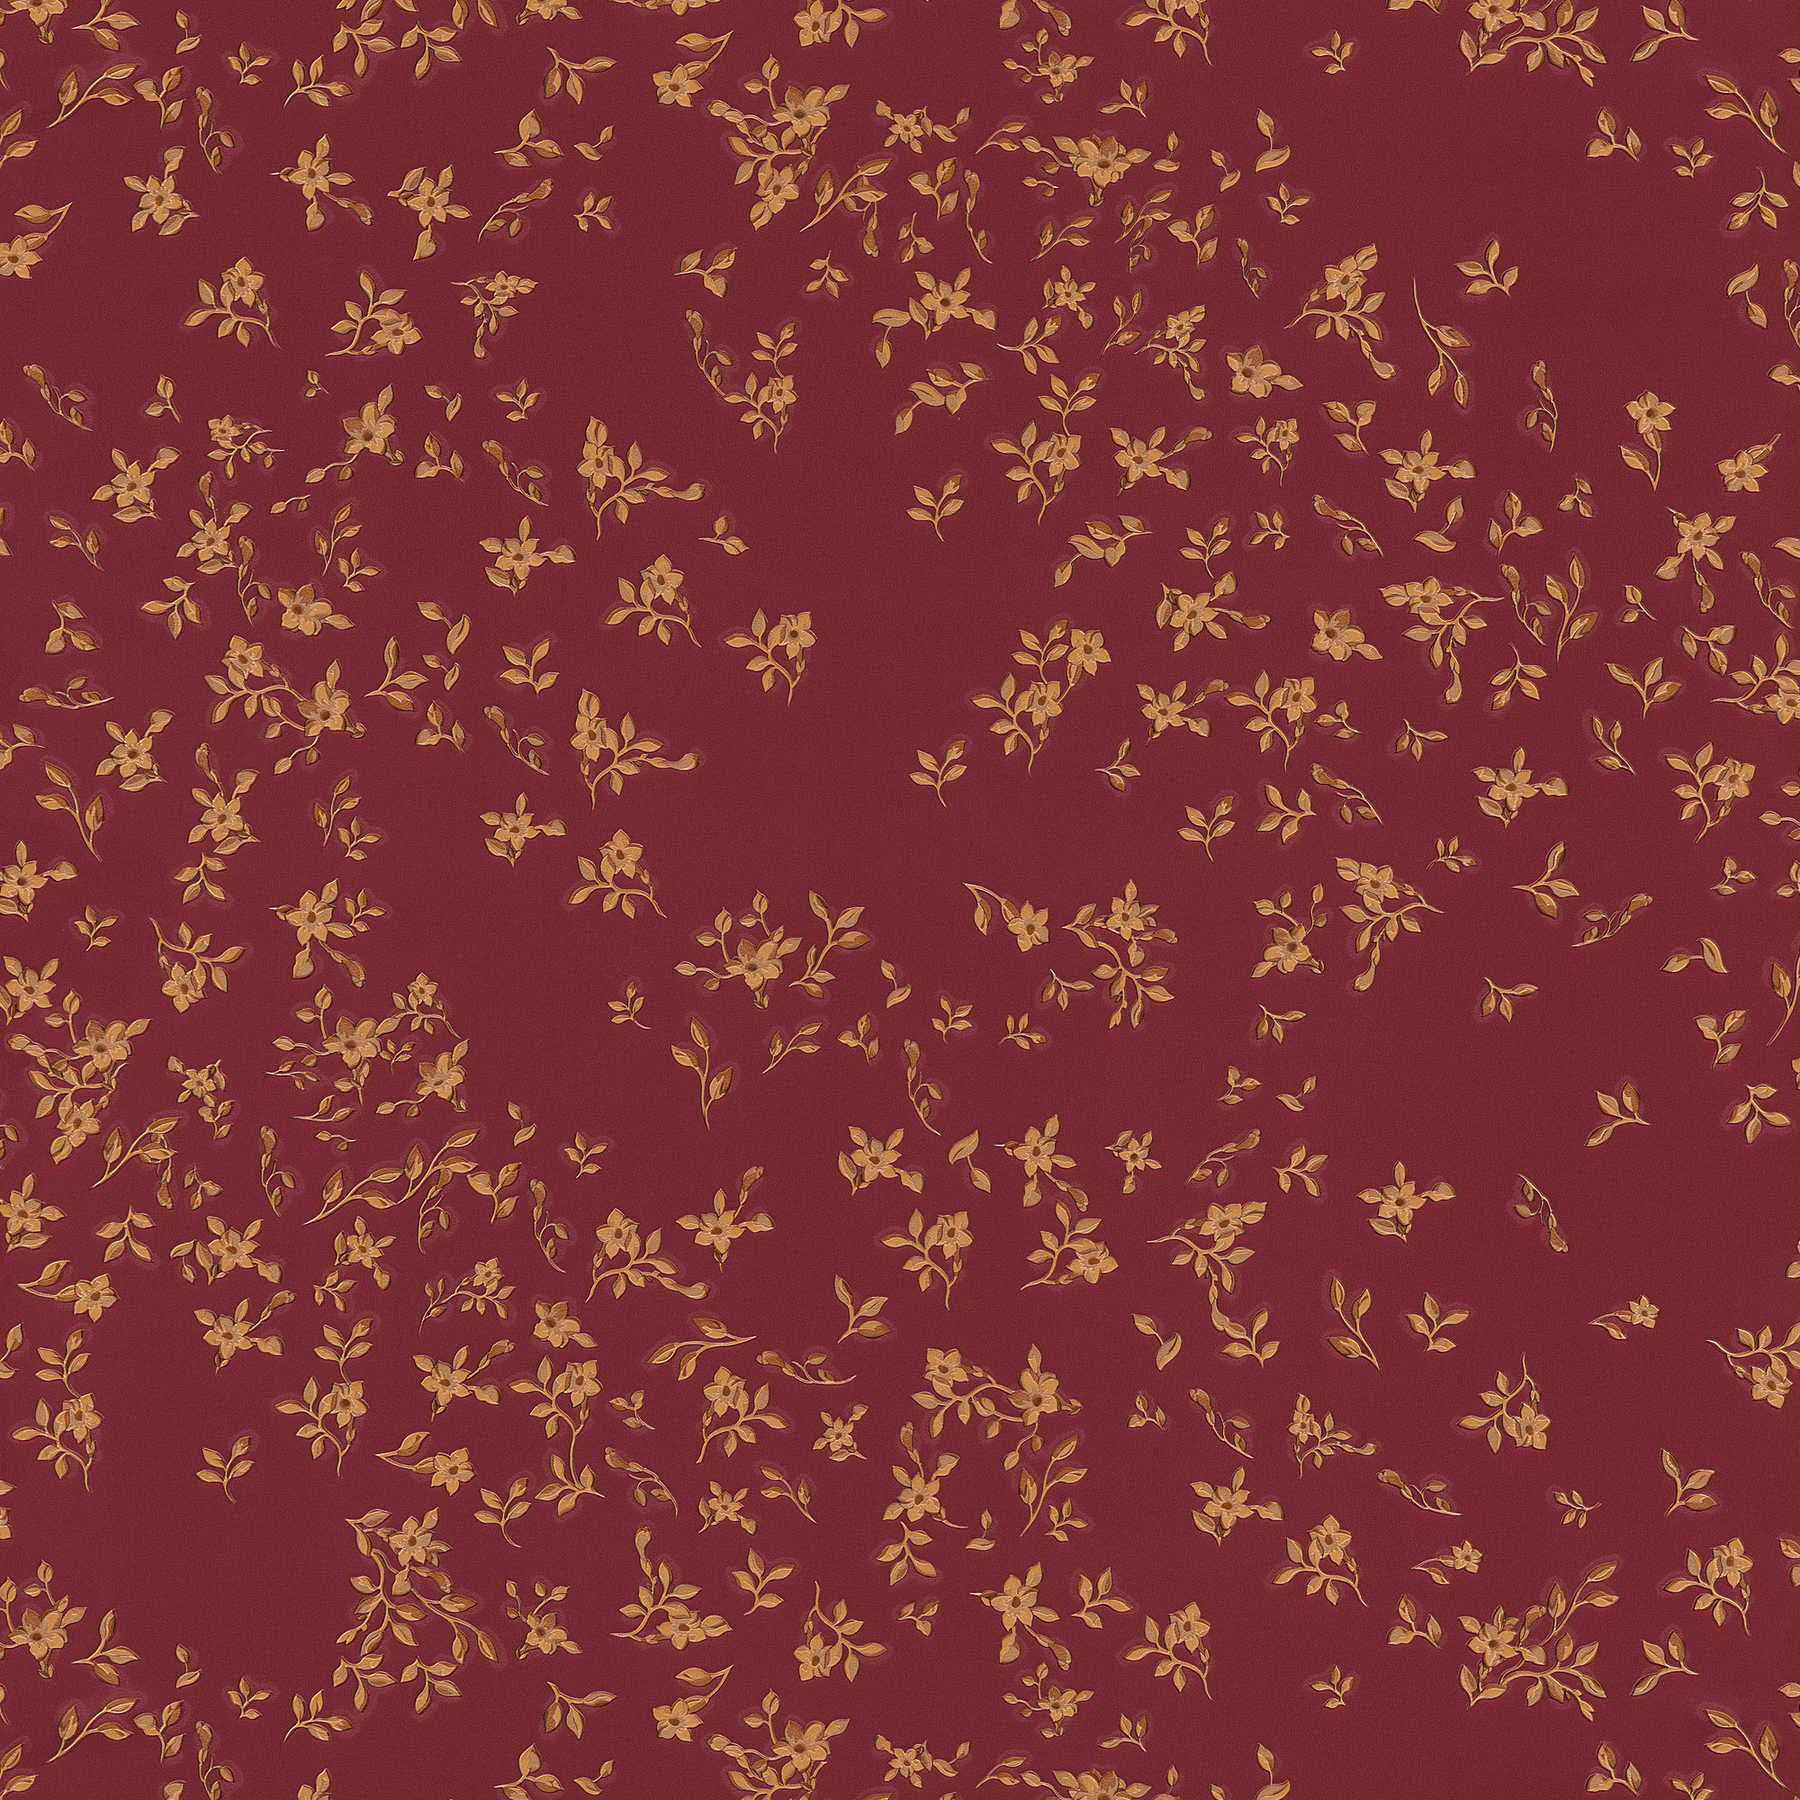 Red VERSACE wallpaper with floral pattern - red, gold, brown
